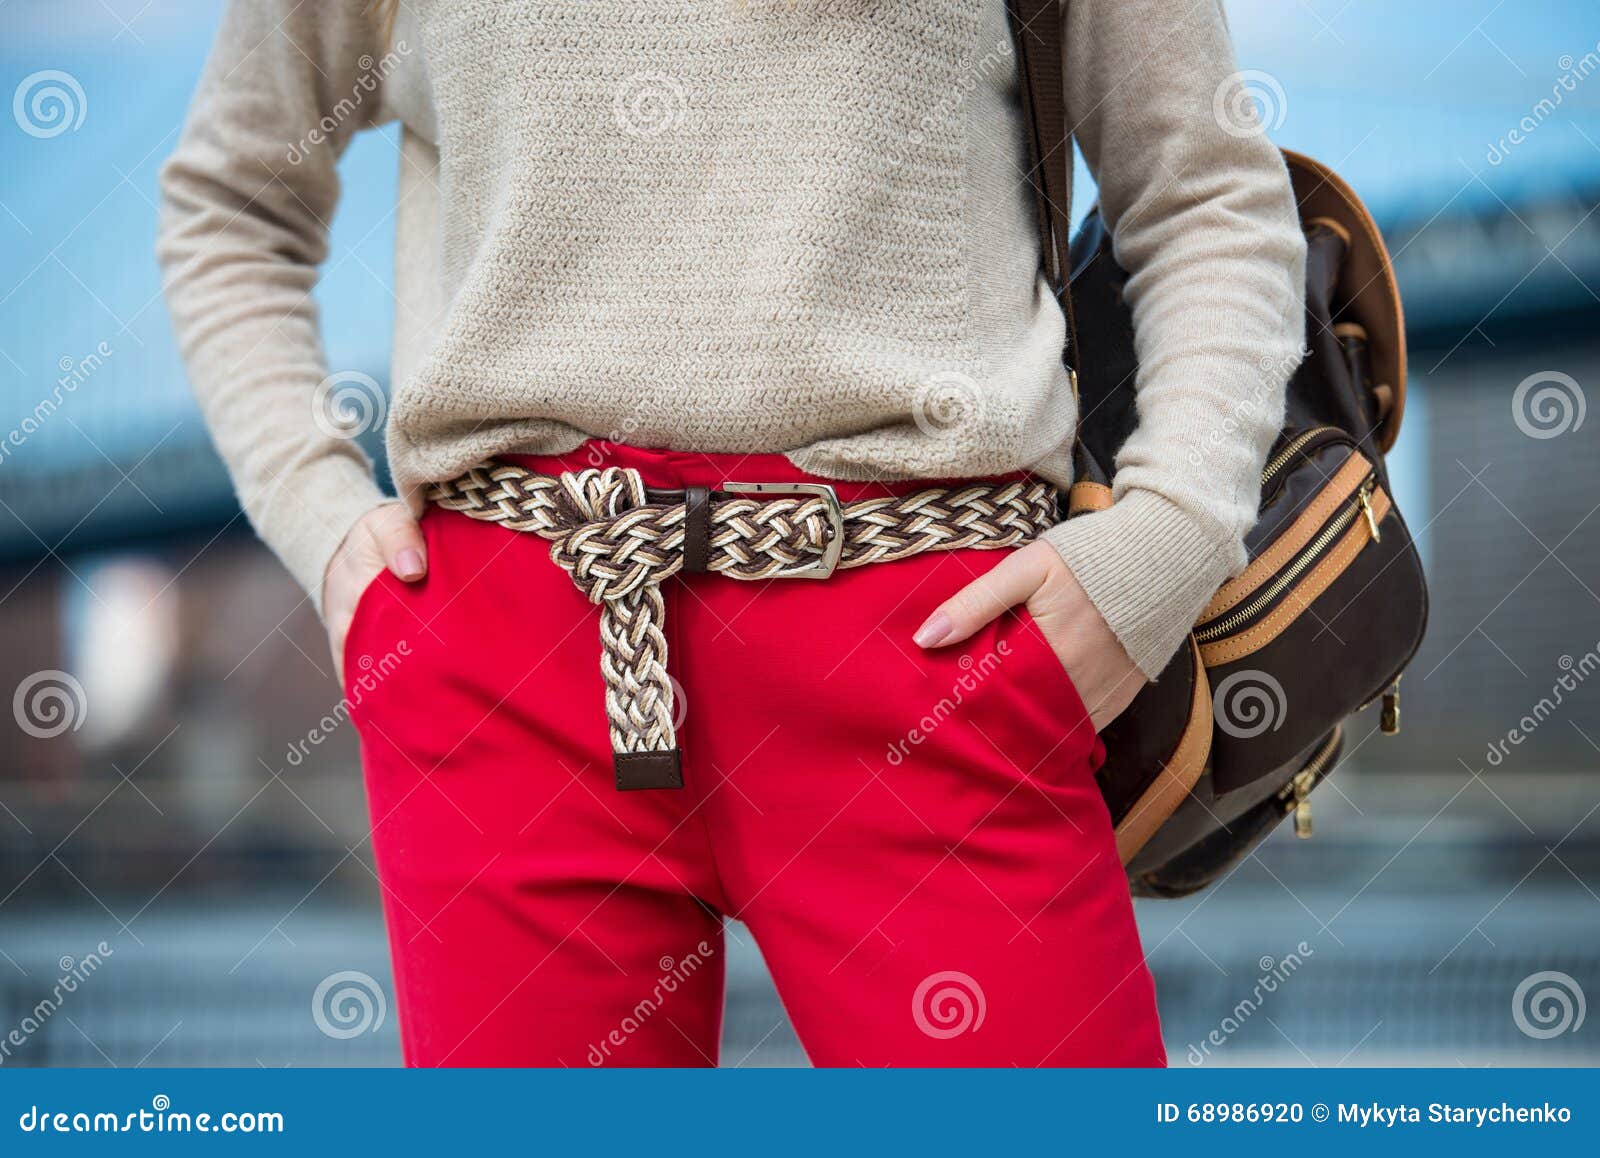 fashionable women`s casual spring outfit with red pants, cardigan, modern belt and bag